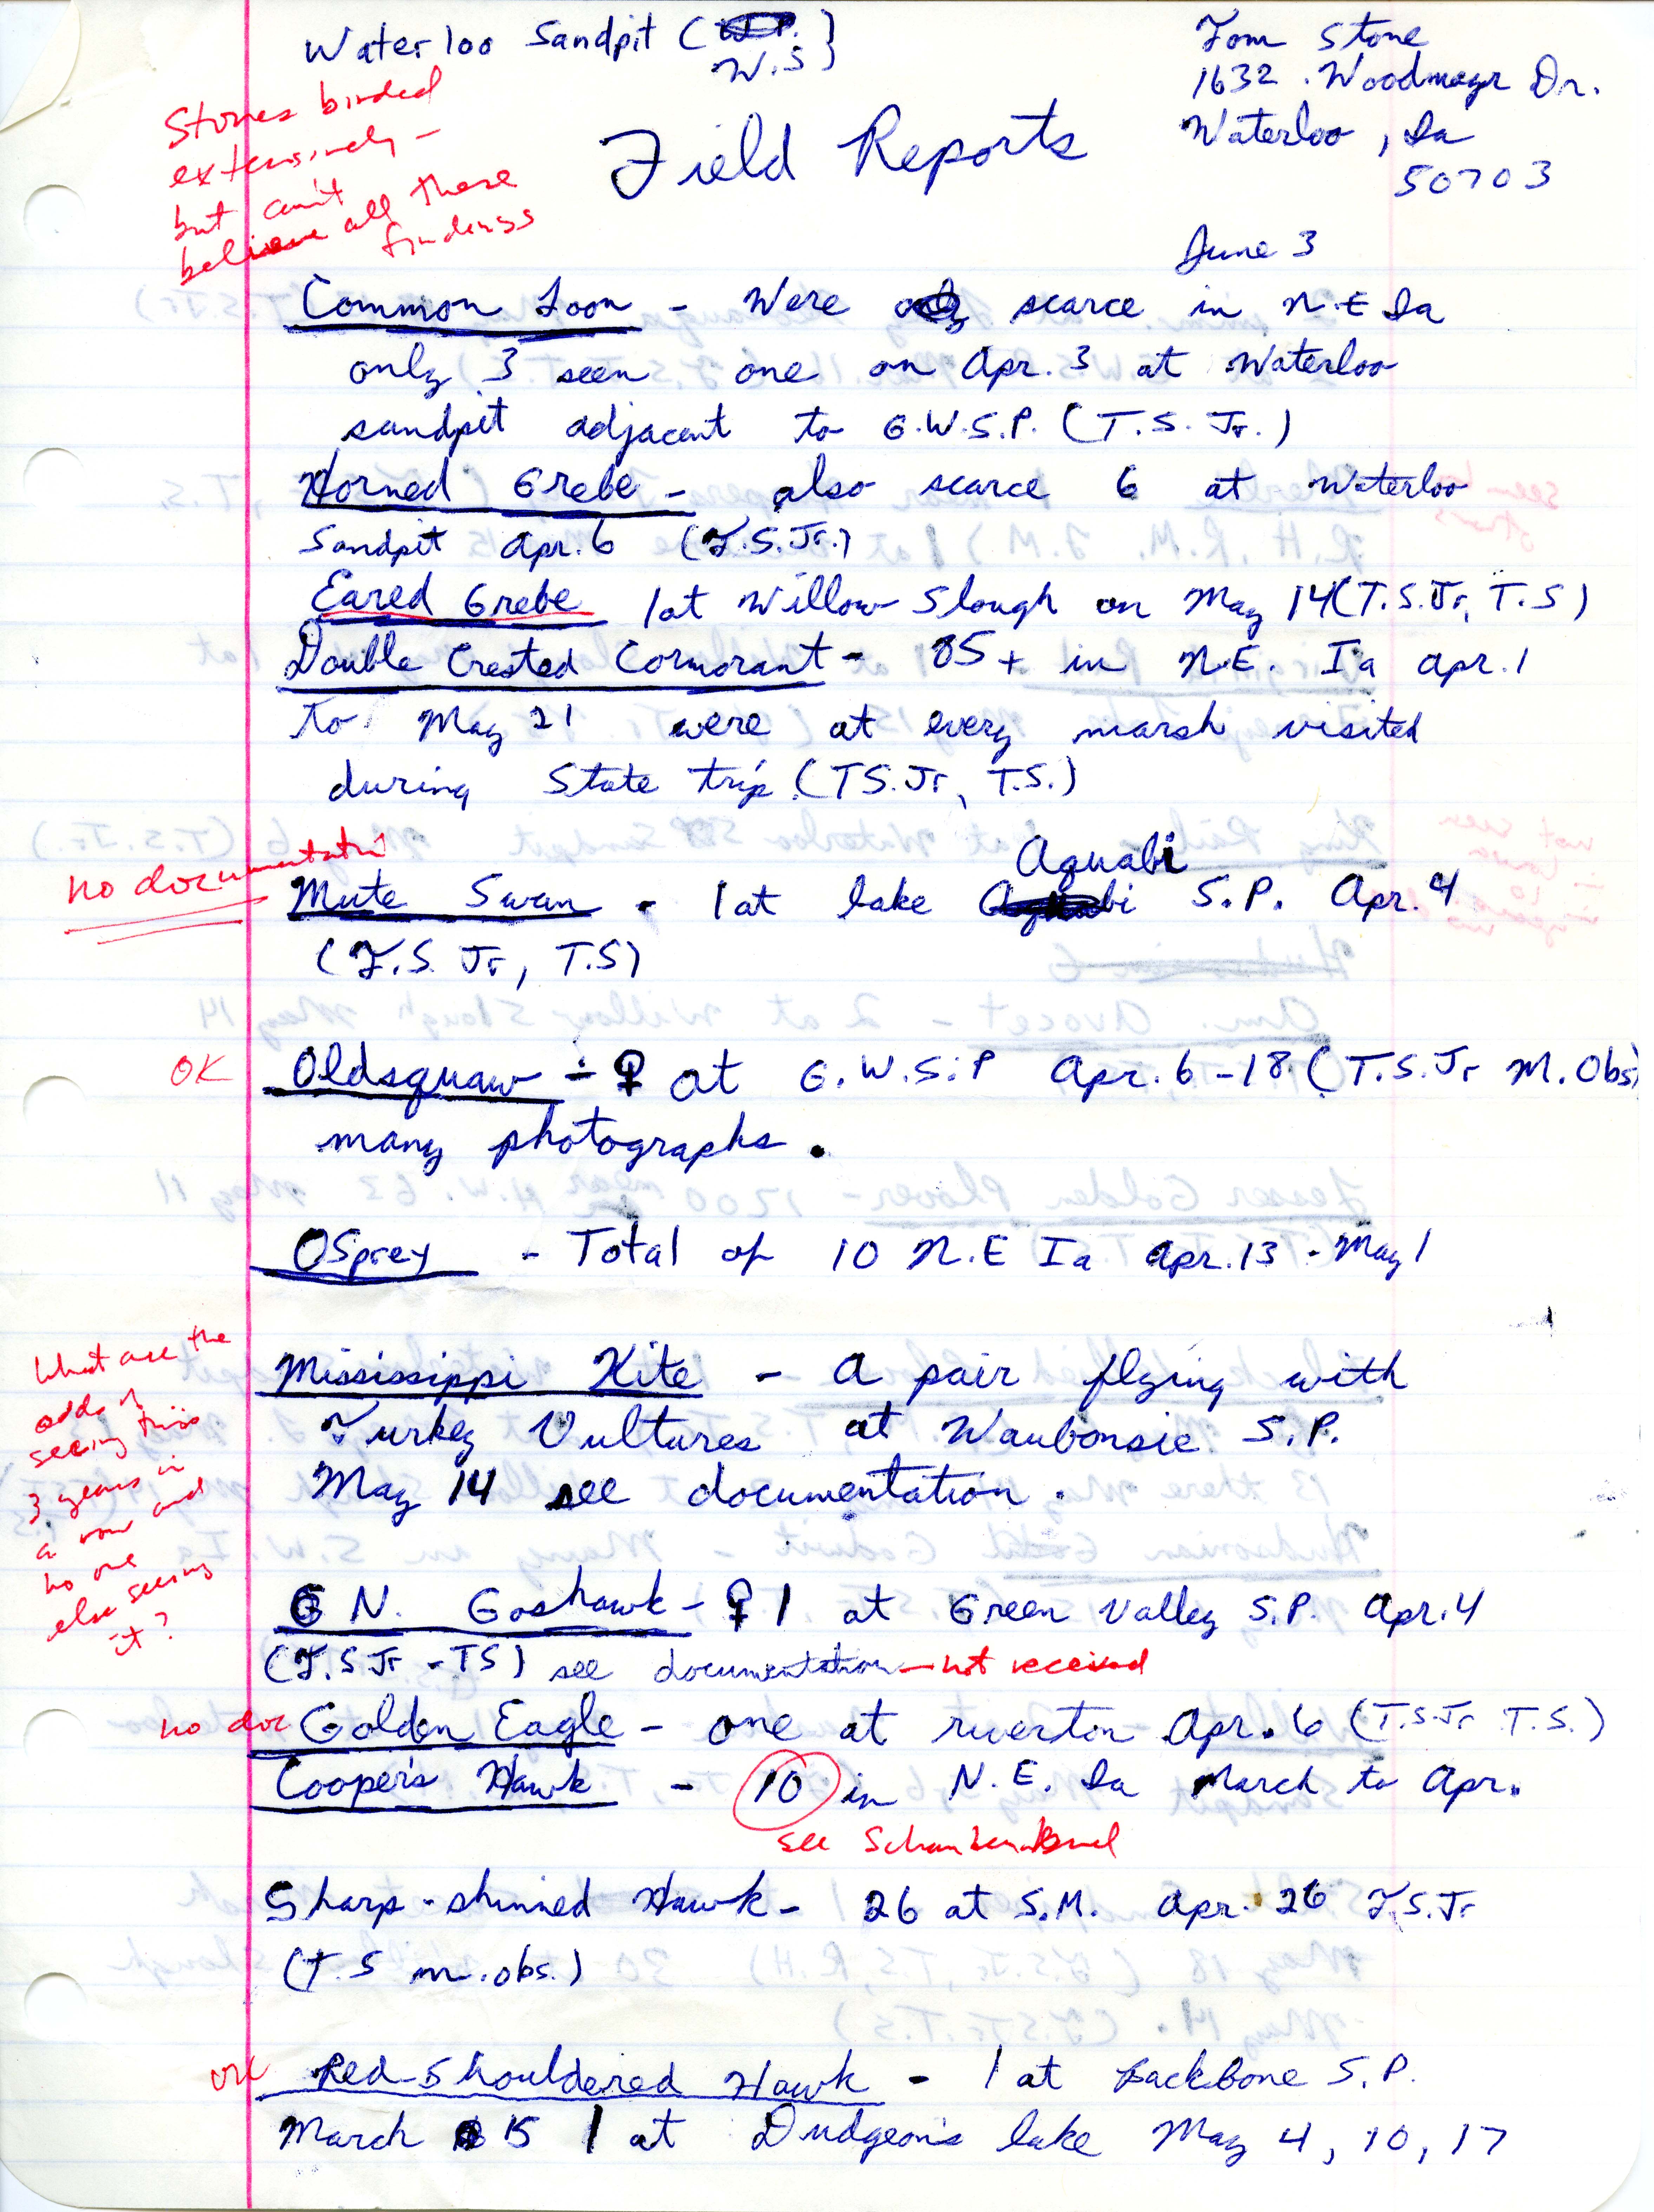 Field notes contributed by Tom Stone, June 3, 1980